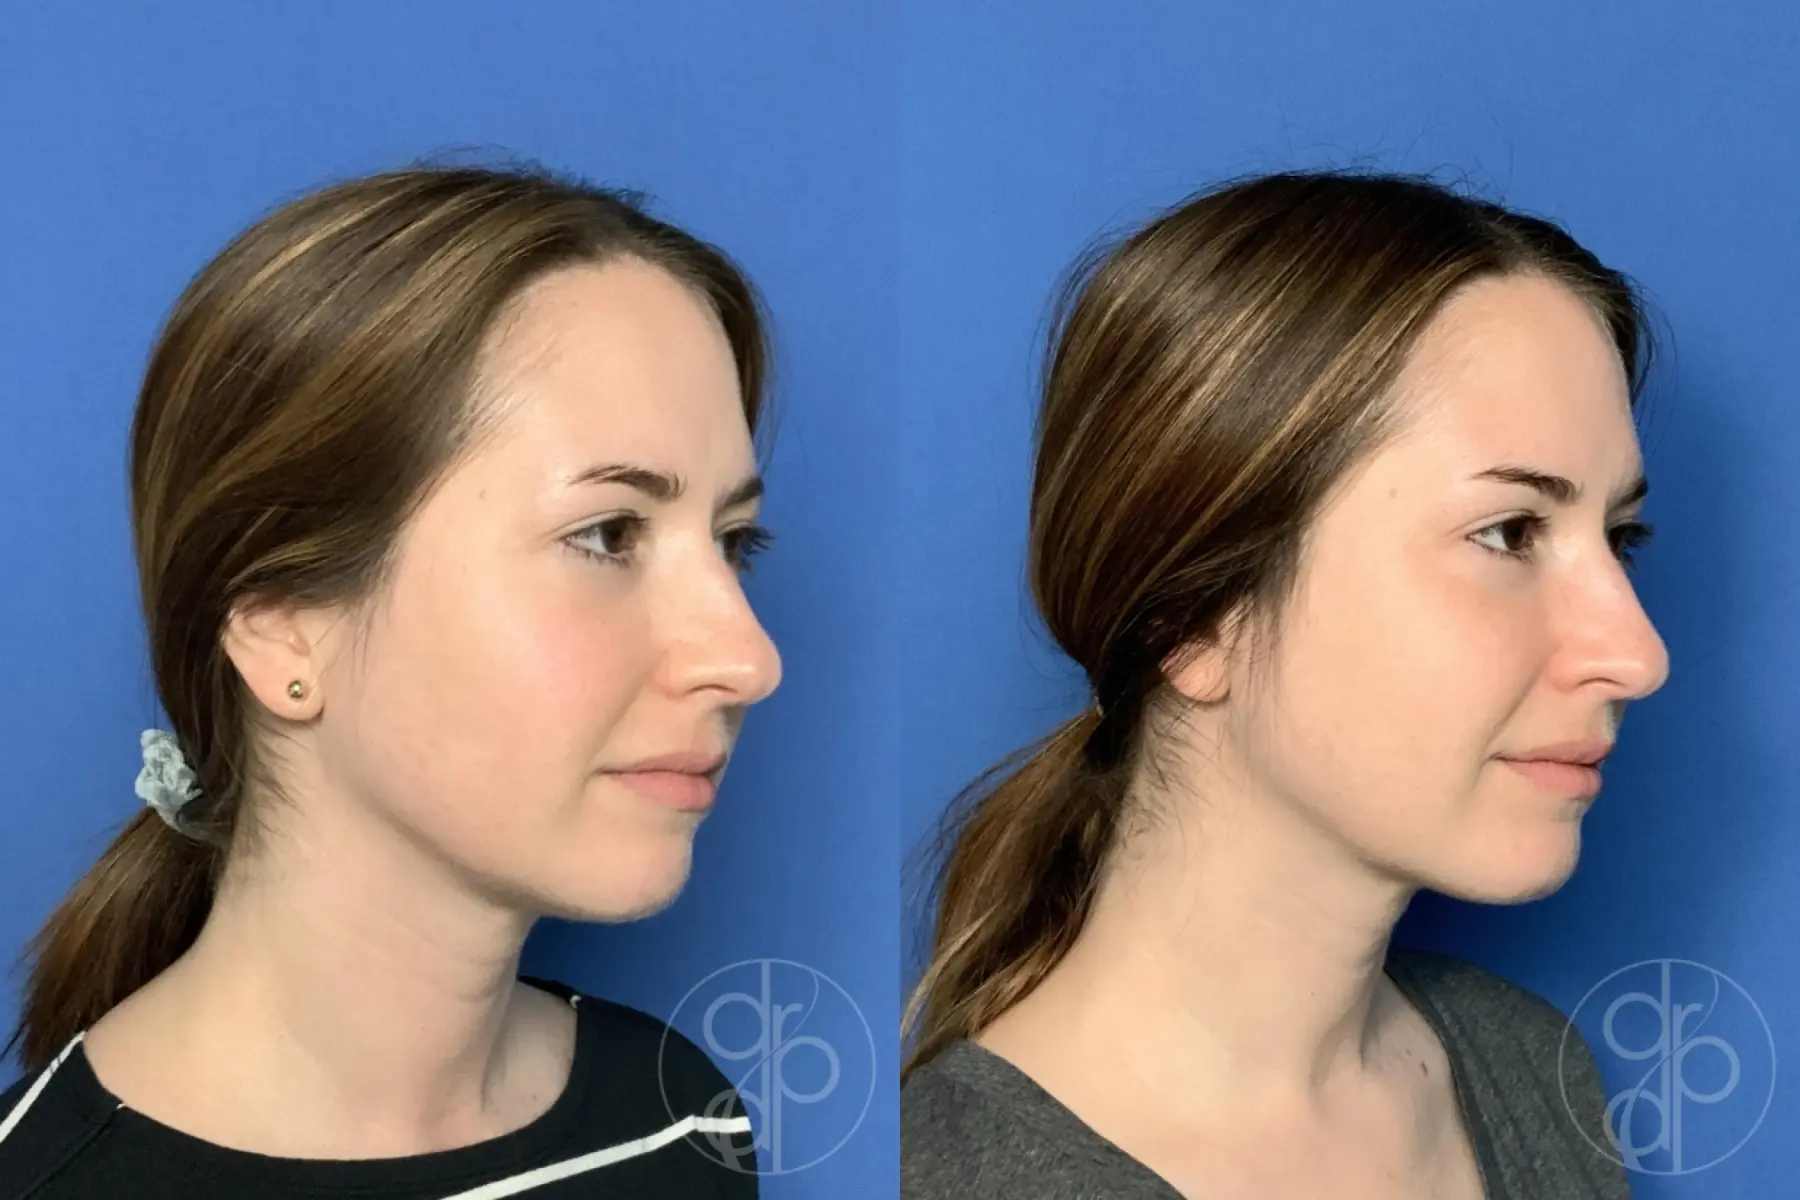 patient 13355 fillers before and after result - Before and After 3